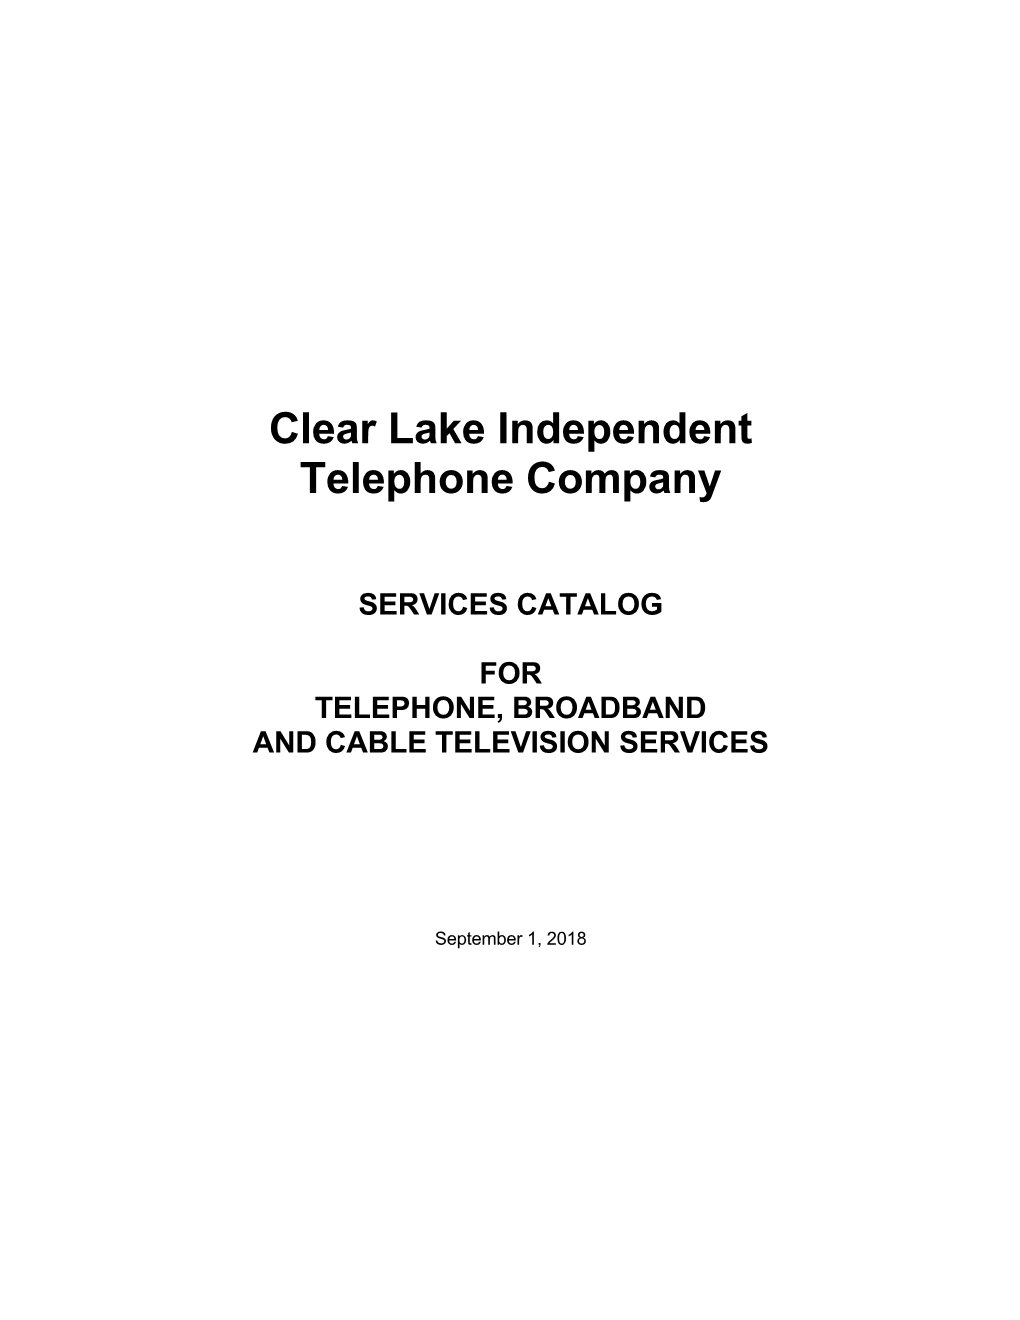 Clear Lake Independent Telephone Company